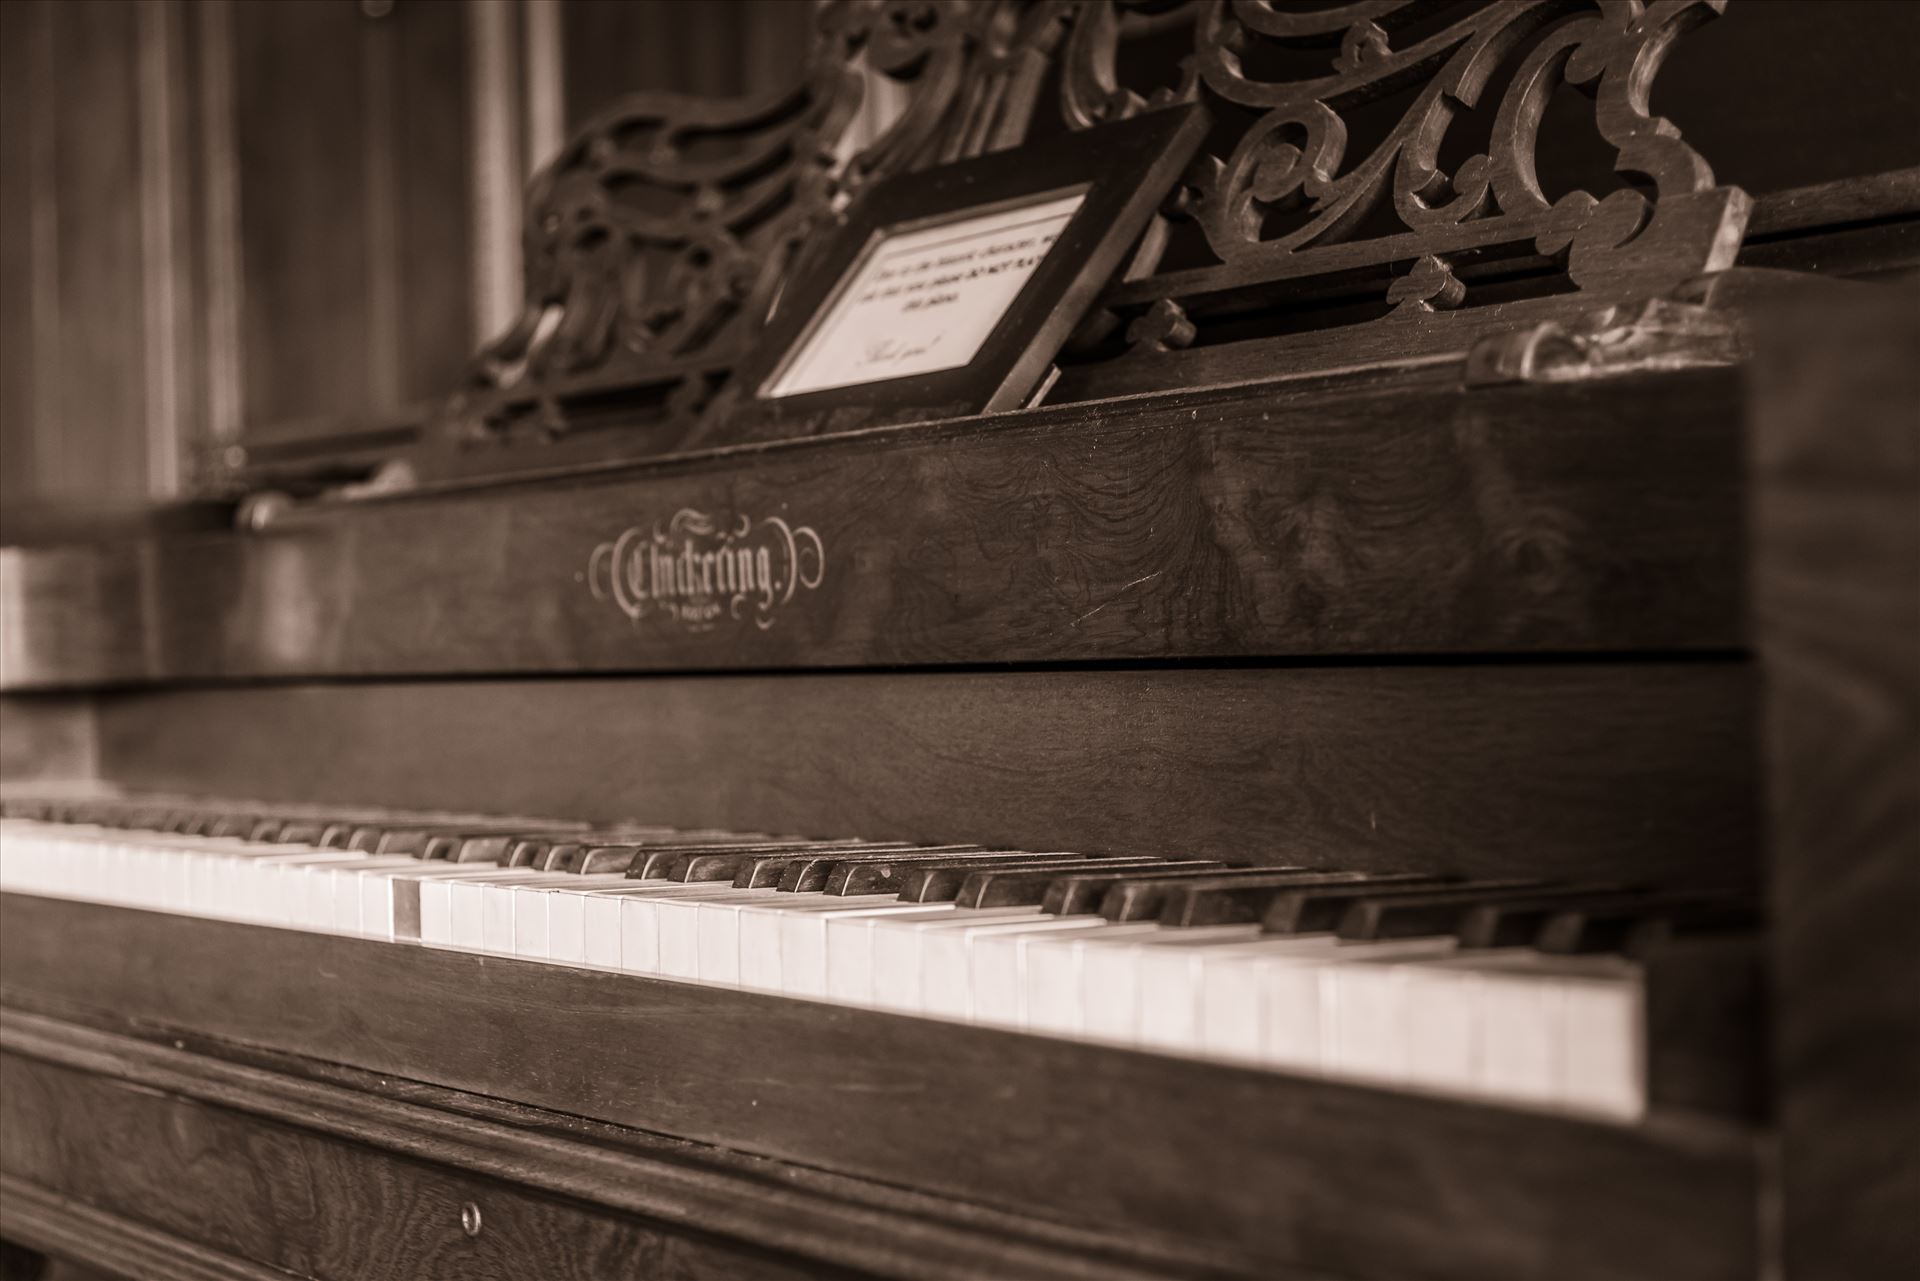 Stanley Hotel Piano Close Up FP (1 of 1).JPG -  by Sarah Williams